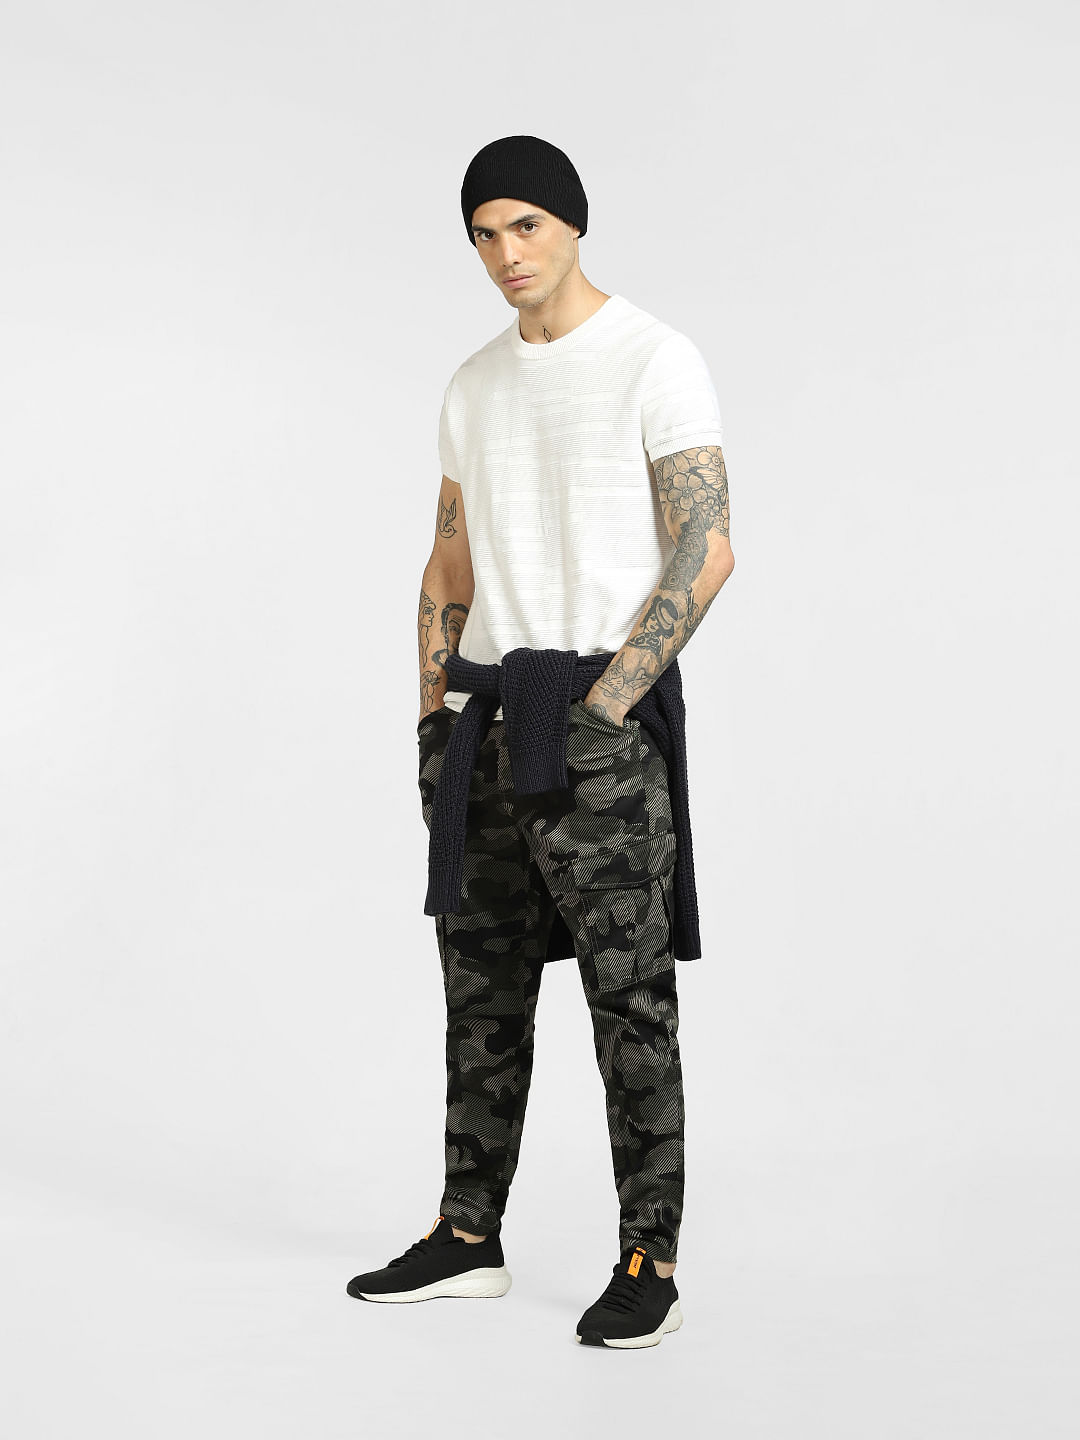 Buy BEING HUMAN White Printed Cotton Regular Fit Men's Track Pants |  Shoppers Stop